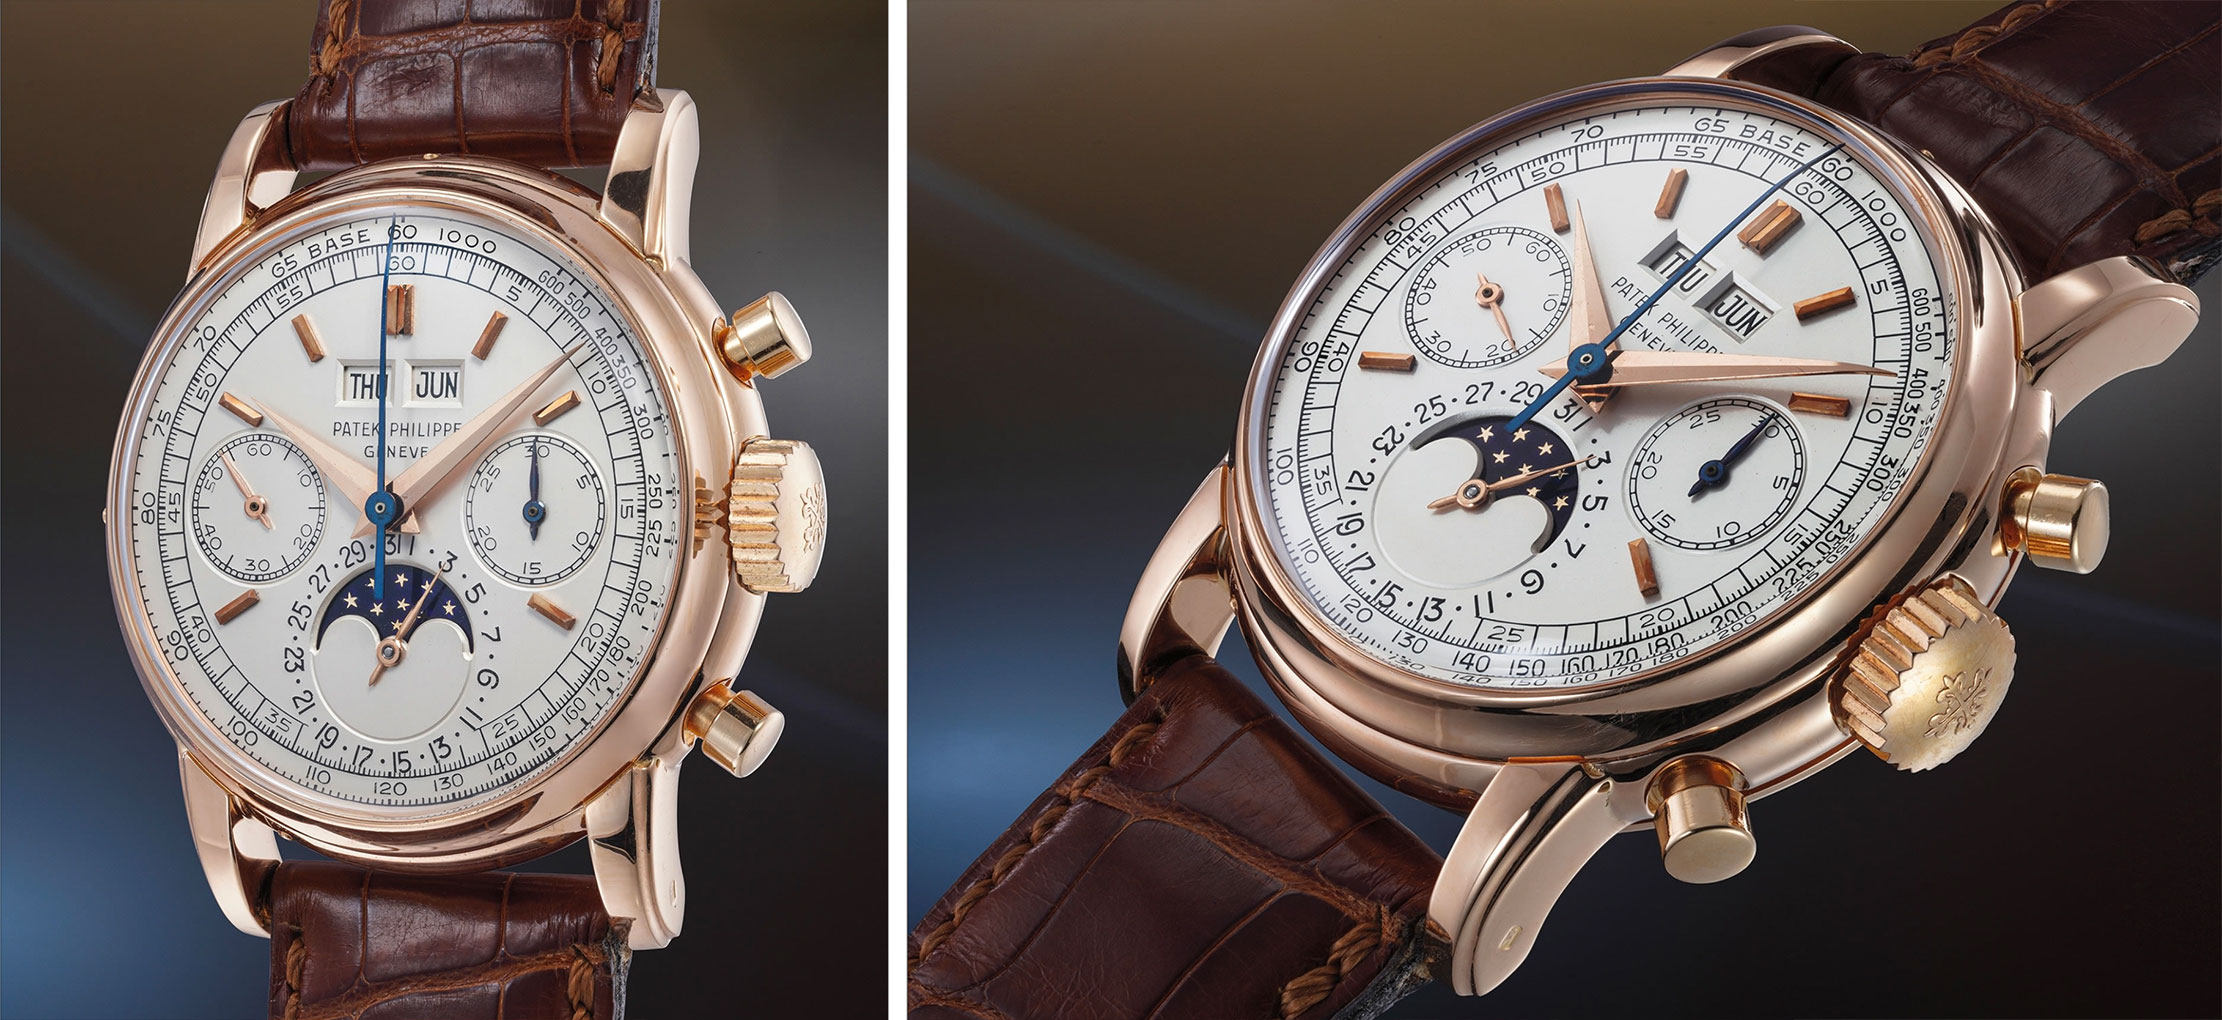 Ten most expensive watches sold at Phillips Geneva Watch Auction: XV